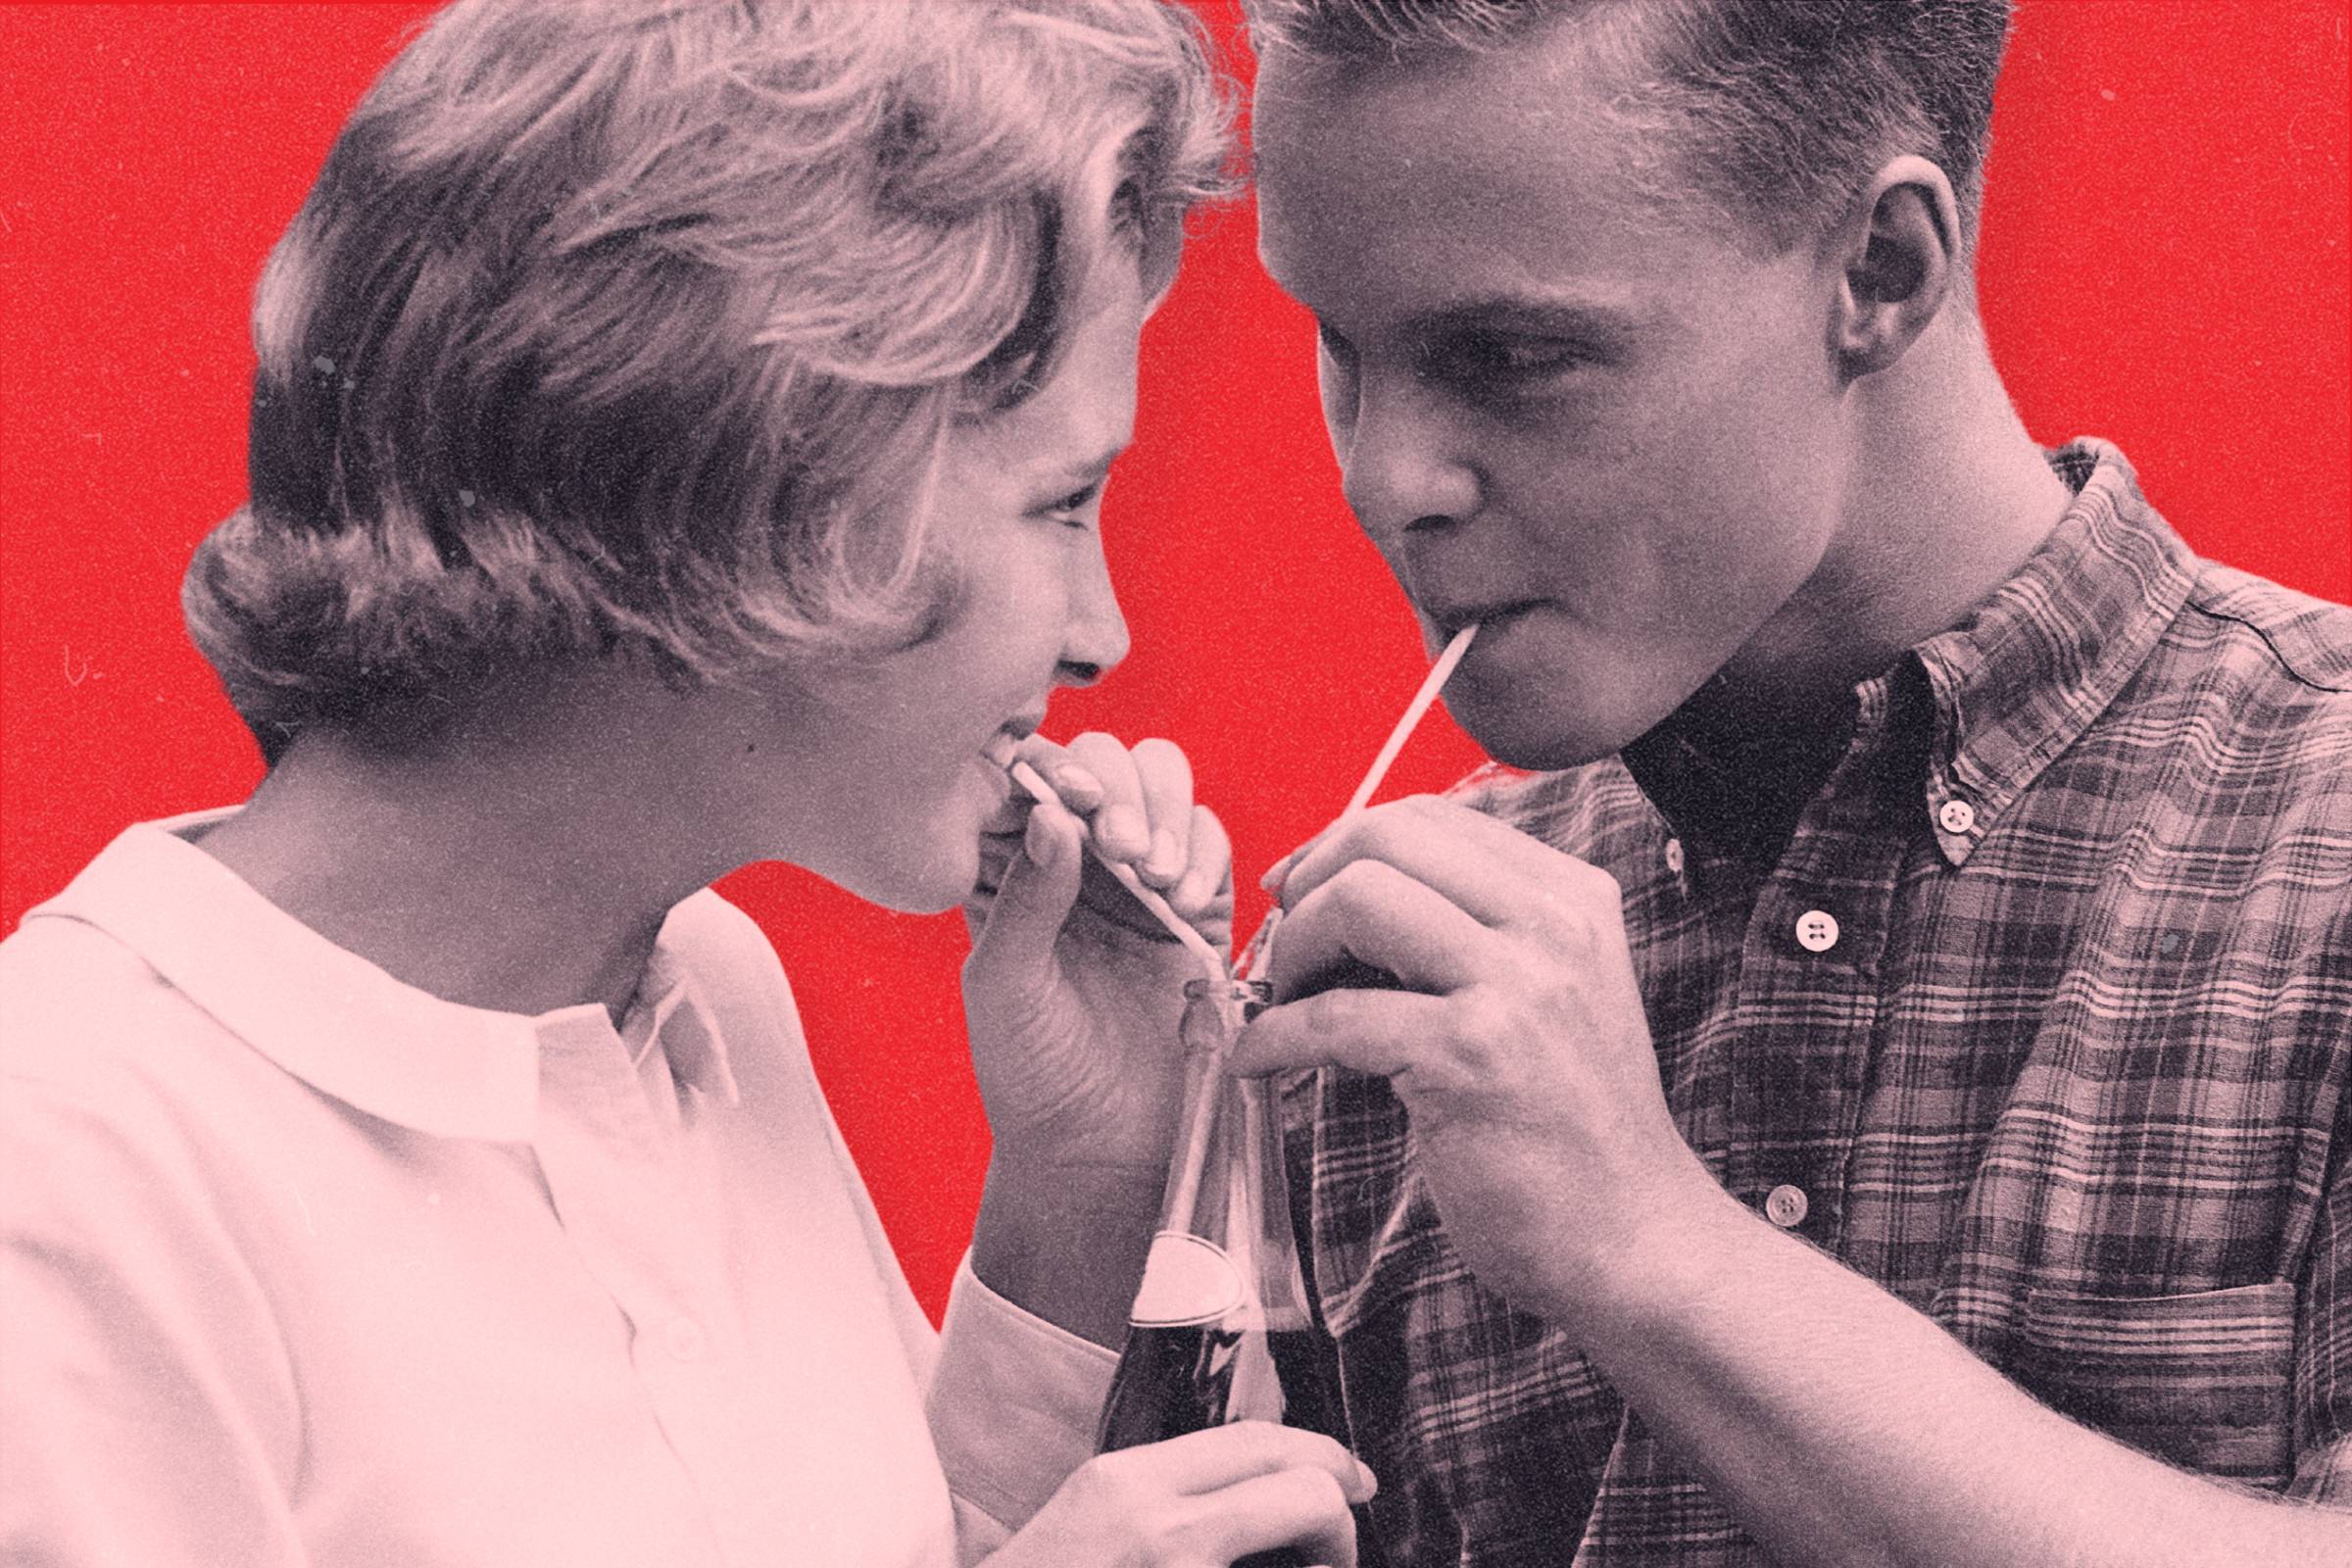 A vintage photograph of a couple drinking out of a soda bottle with two straws